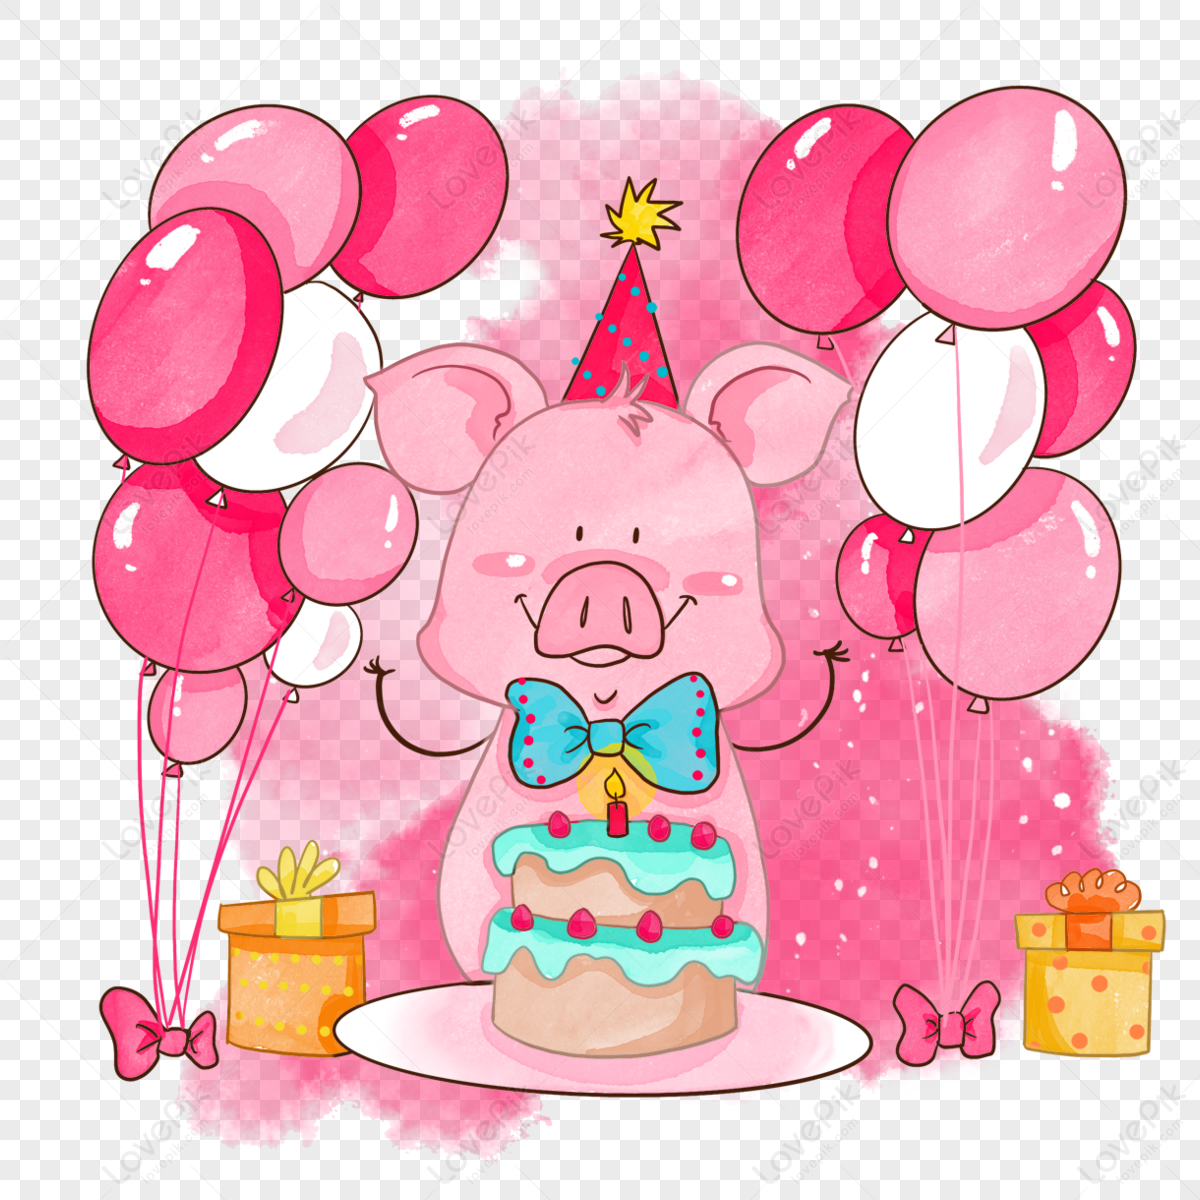 Watercolor cartoon animal pig,balloon,child,cute png transparent background